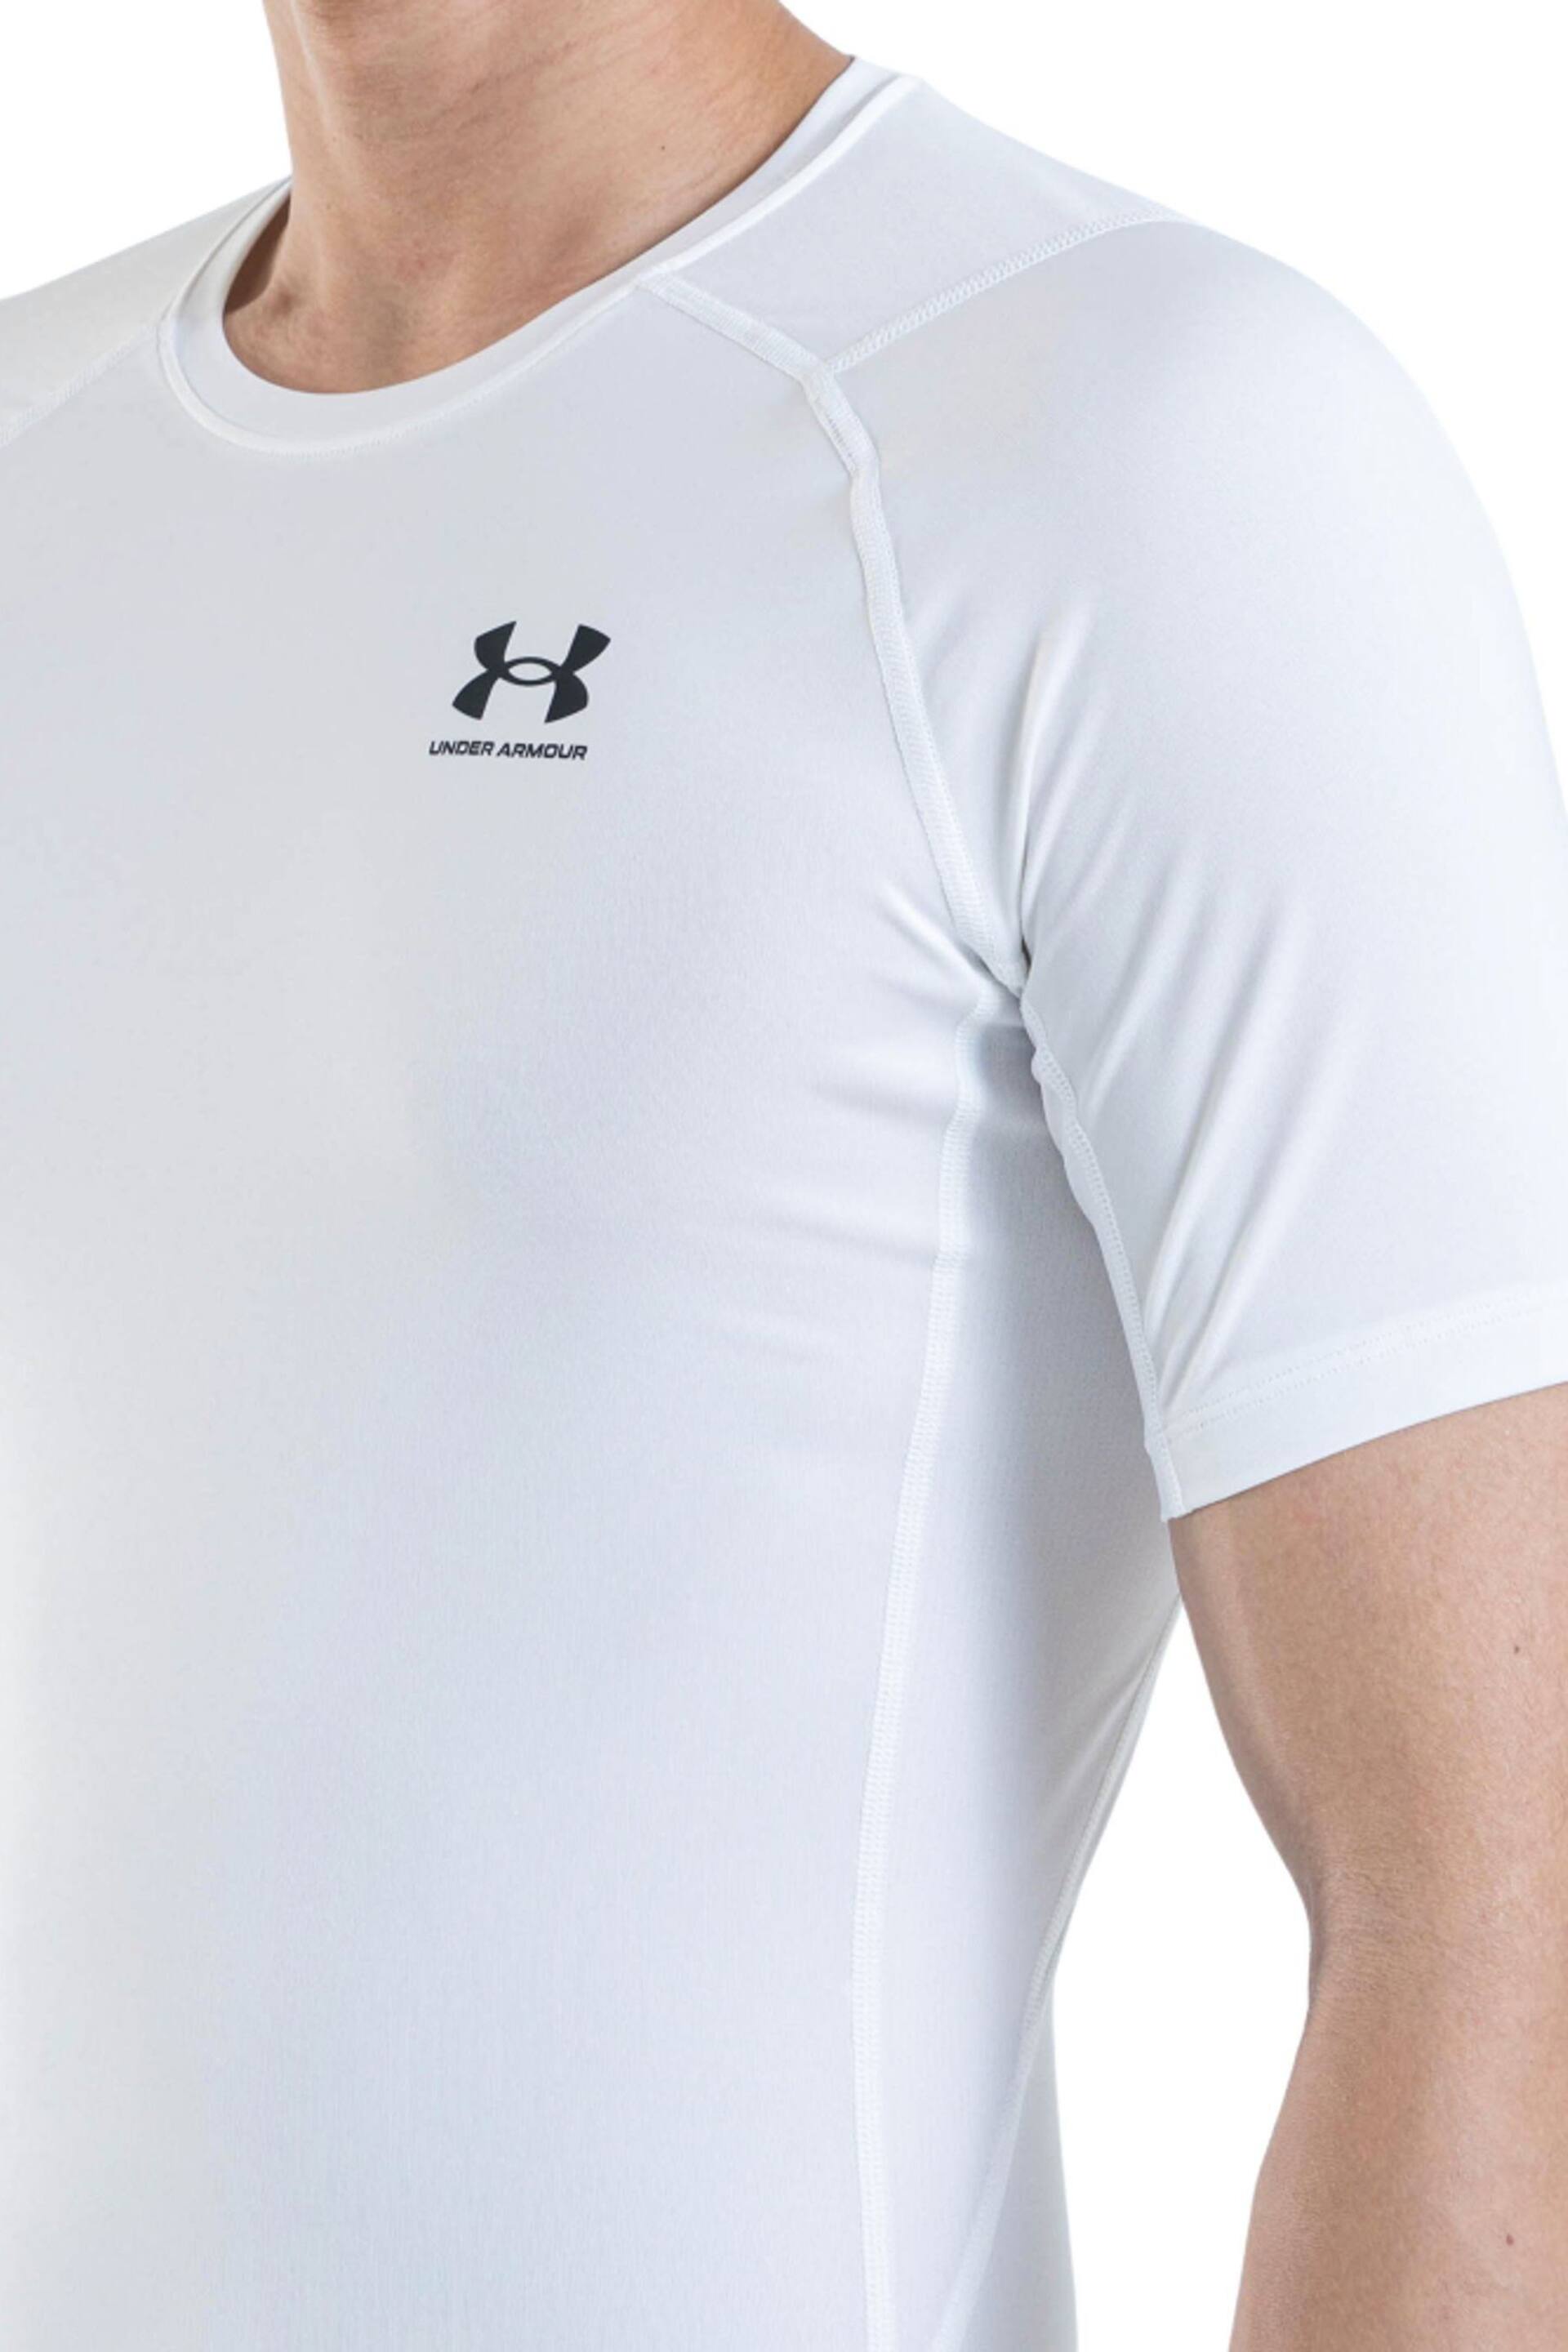 Under Armour White/Black Heatgear Short Sleeve Compression Top - Image 3 of 4